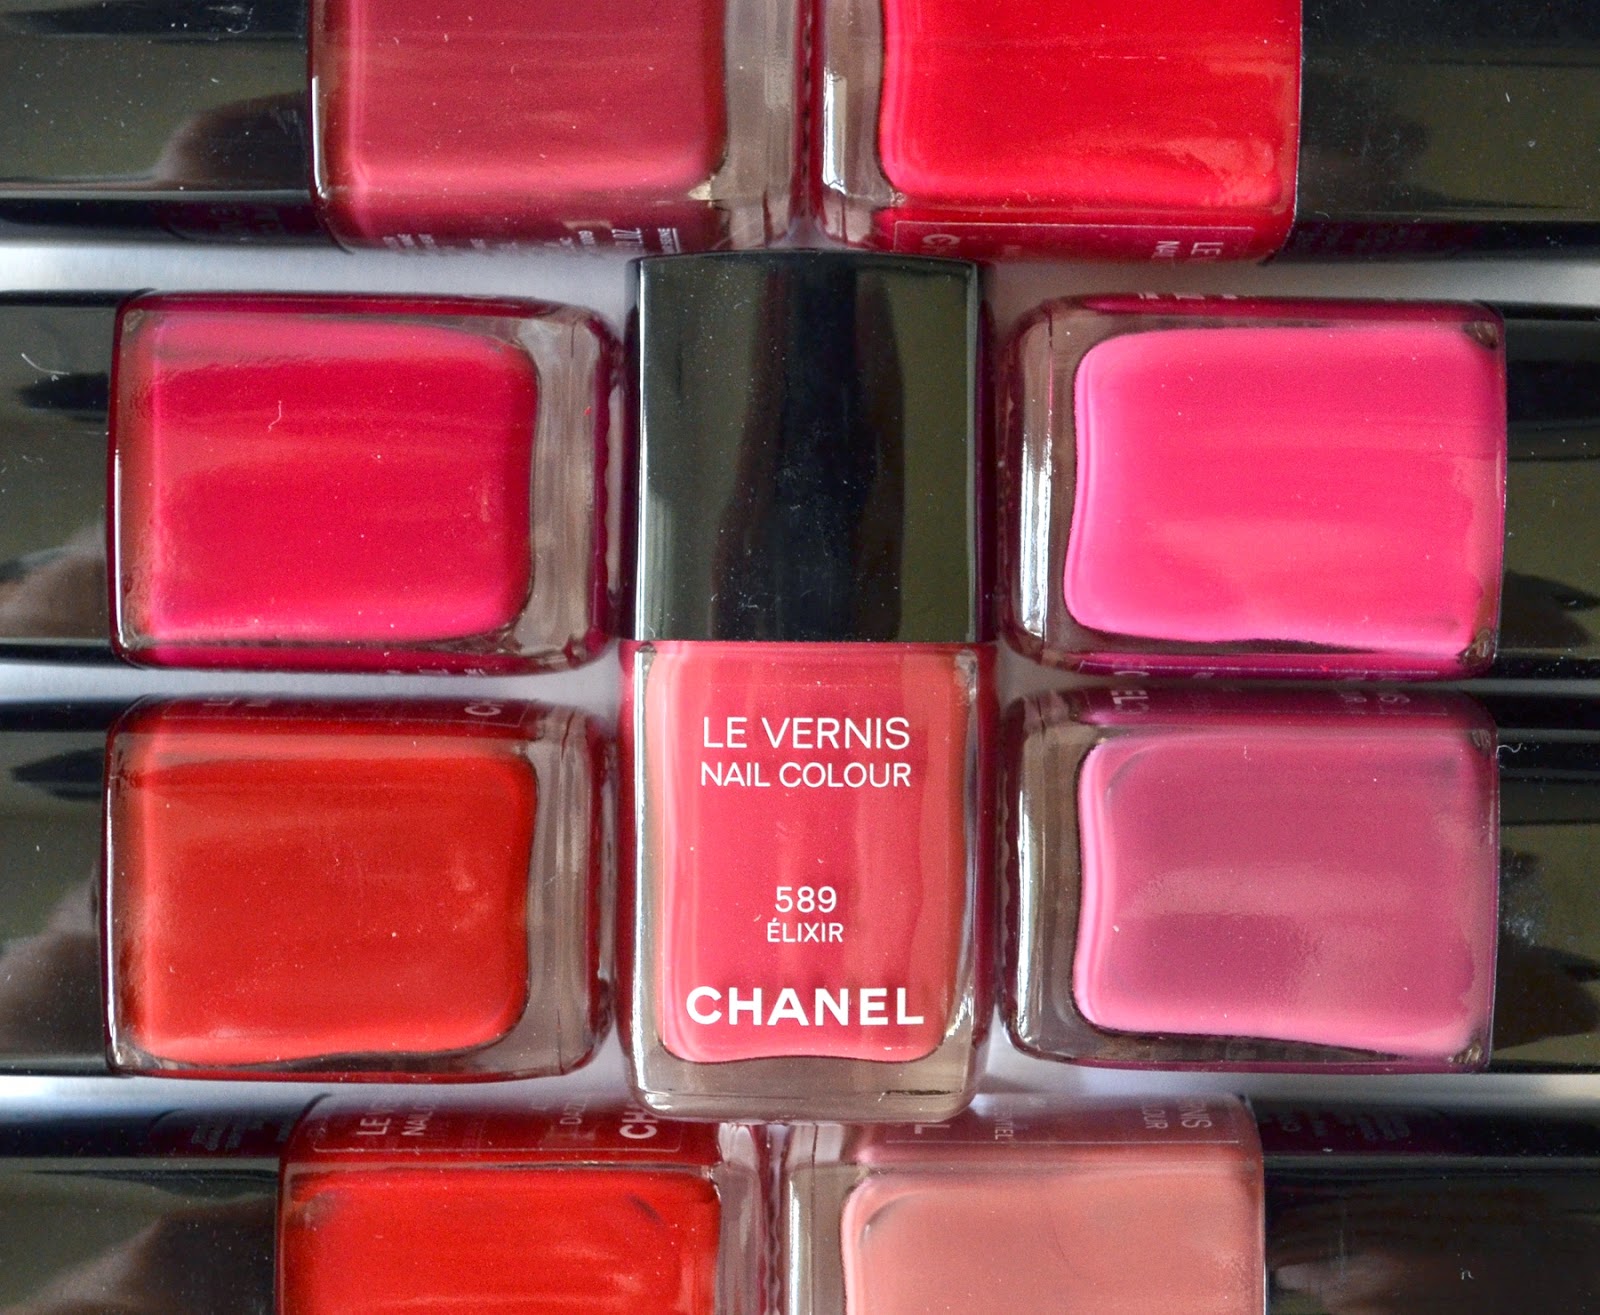 Chanel Le Vernis #589 Elixir from Superstition Fall 2013 Collection Color Me Loud